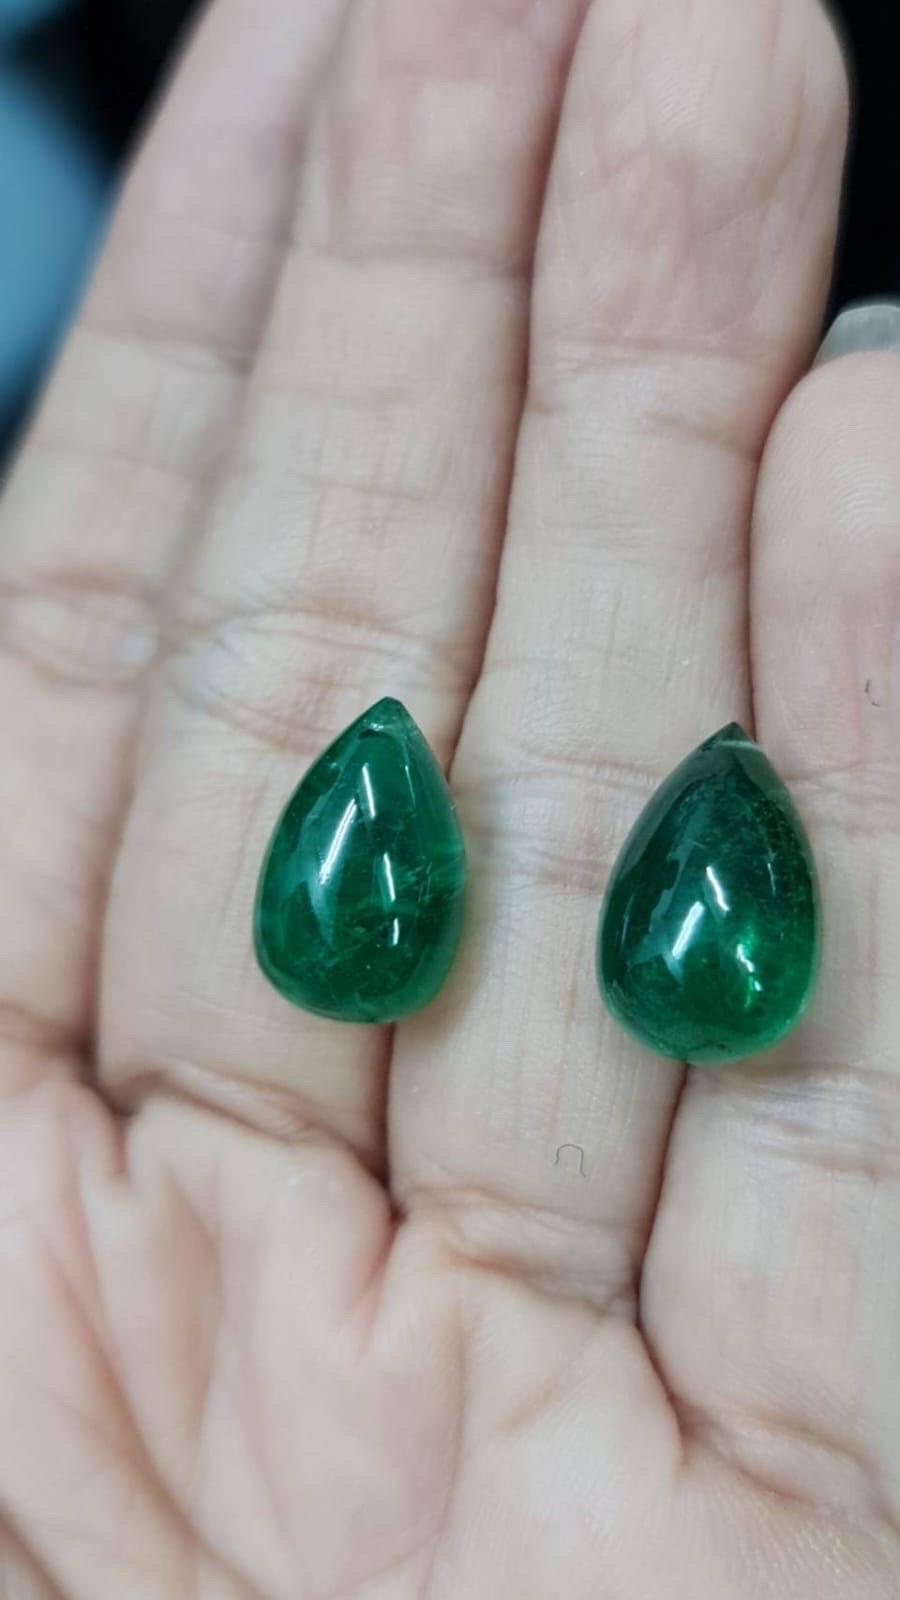 Women's 19.91 Carat Emerald Drops (Loose Stone Only)